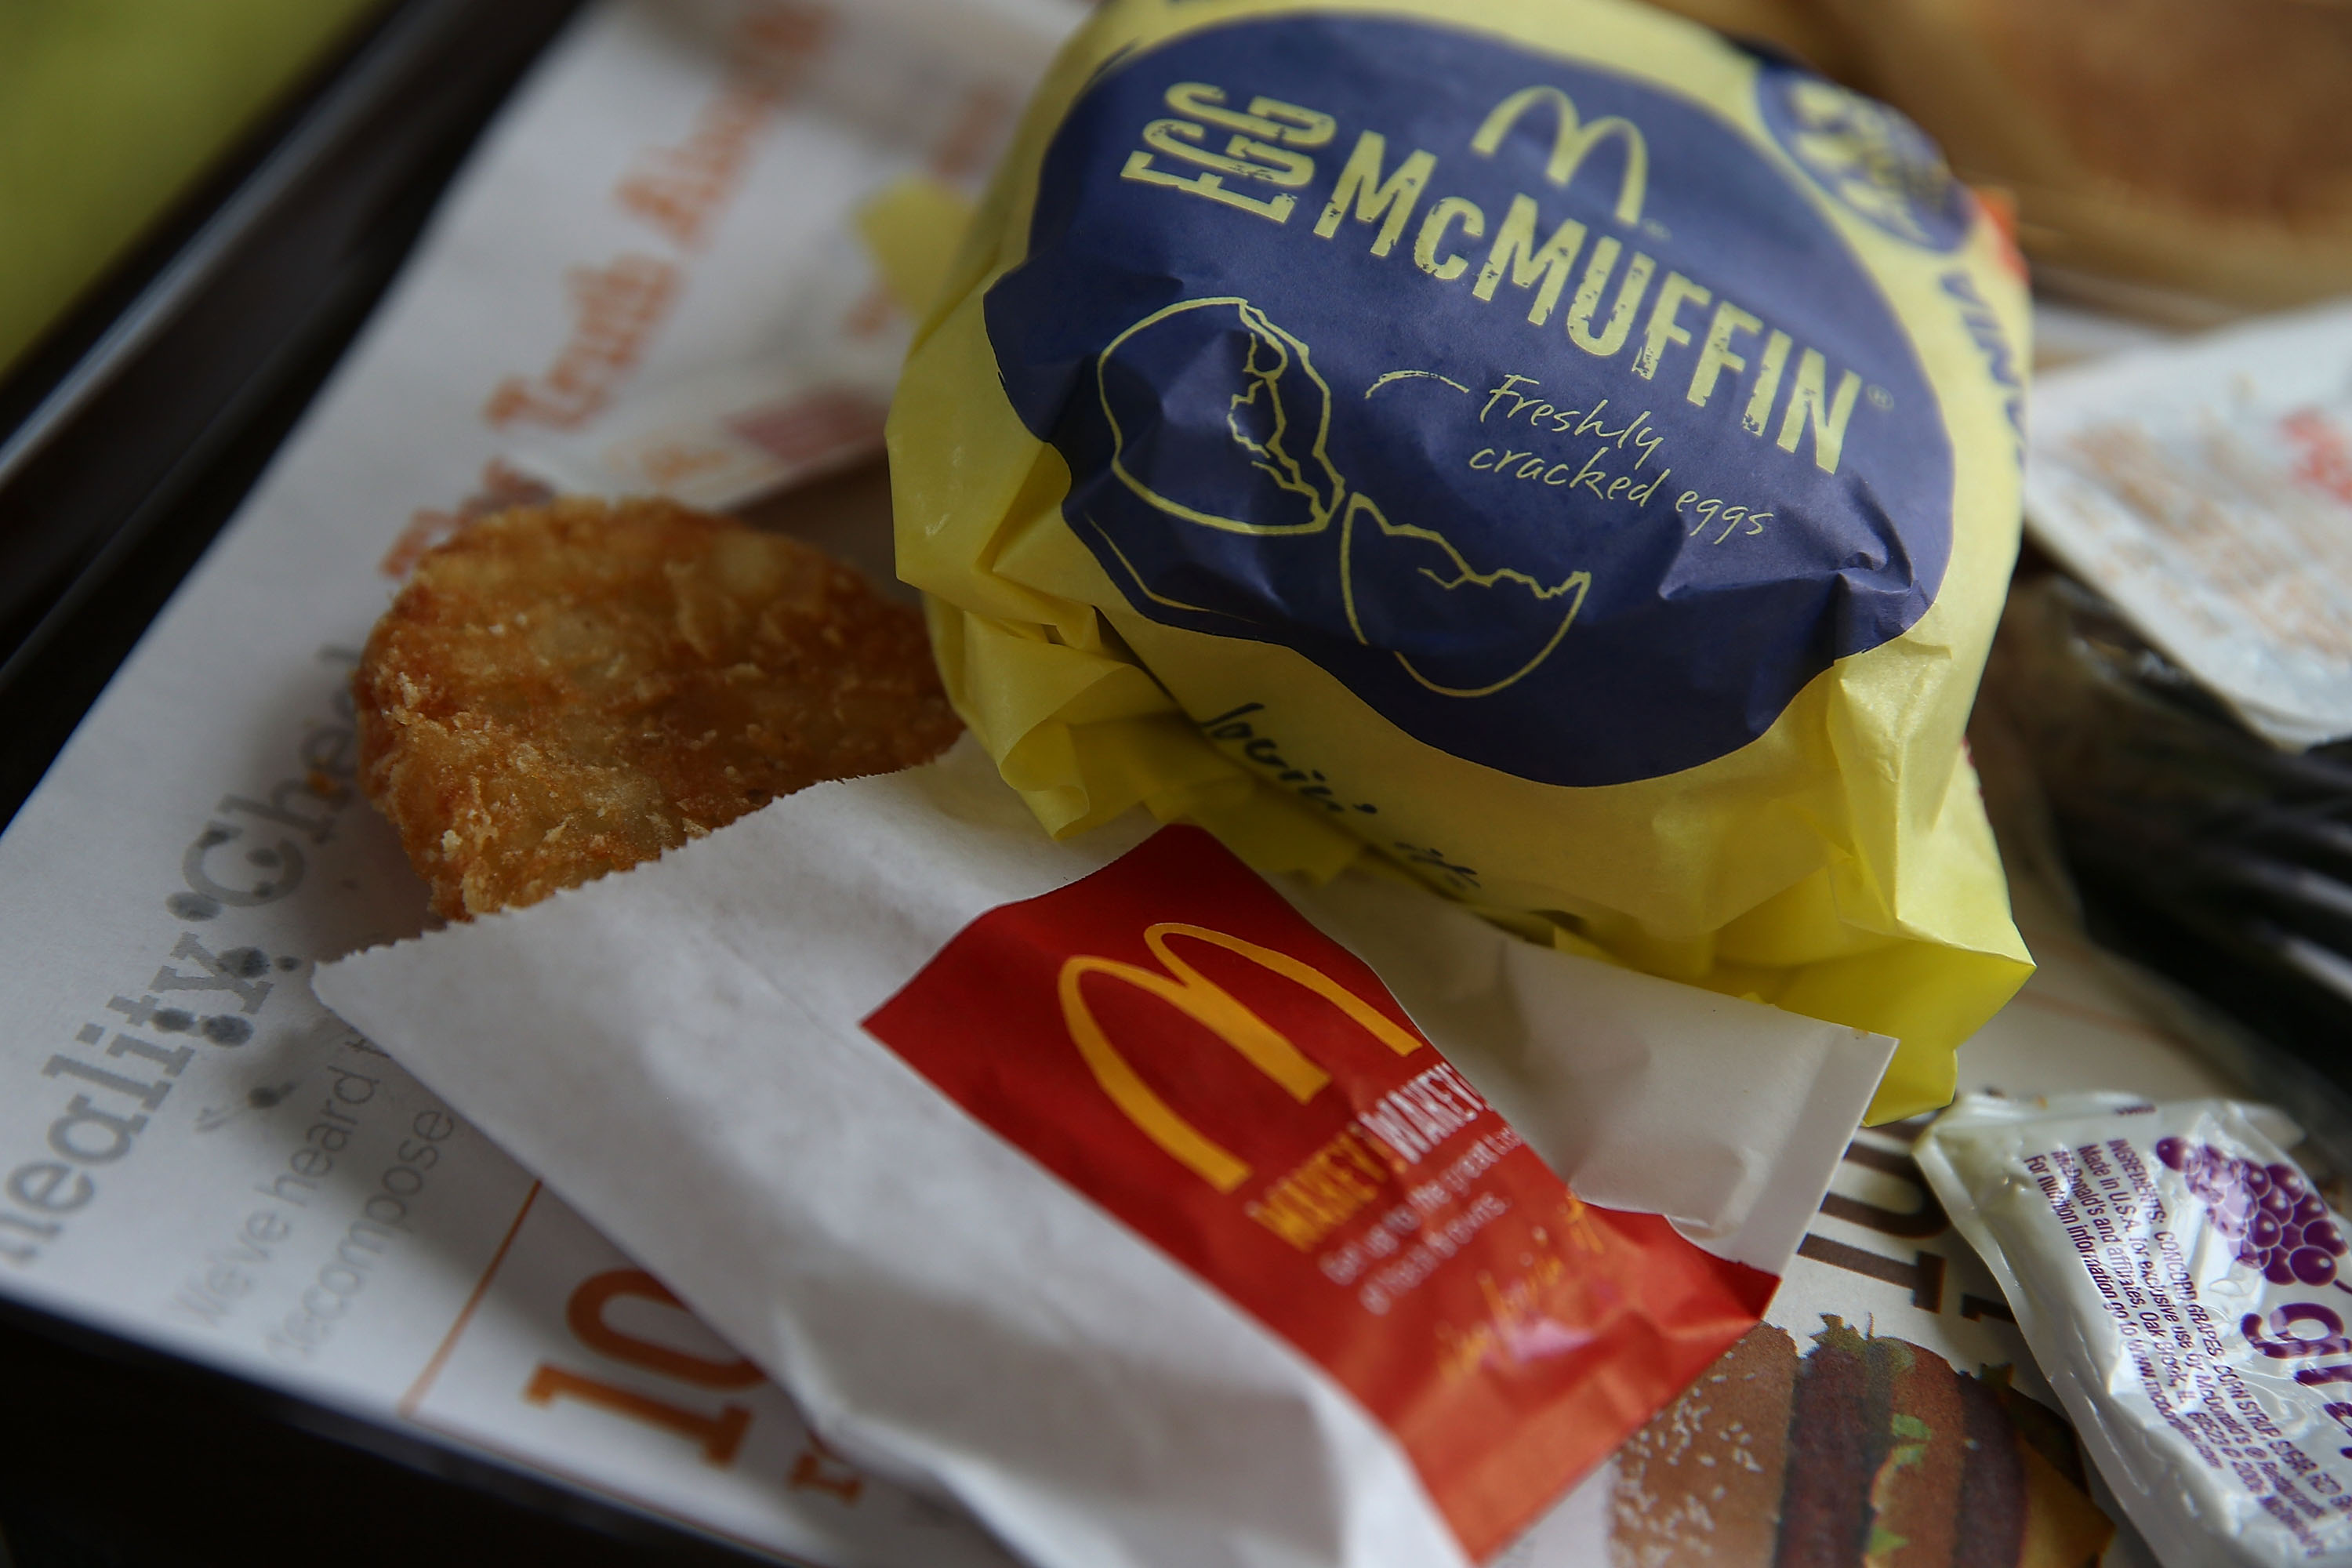 A McDonald's Egg McMuffin and hash browns are displayed at a McDonald's restaurant on July 23, 2015 in Fairfield, California. (Justin Sullivan/Getty Images)